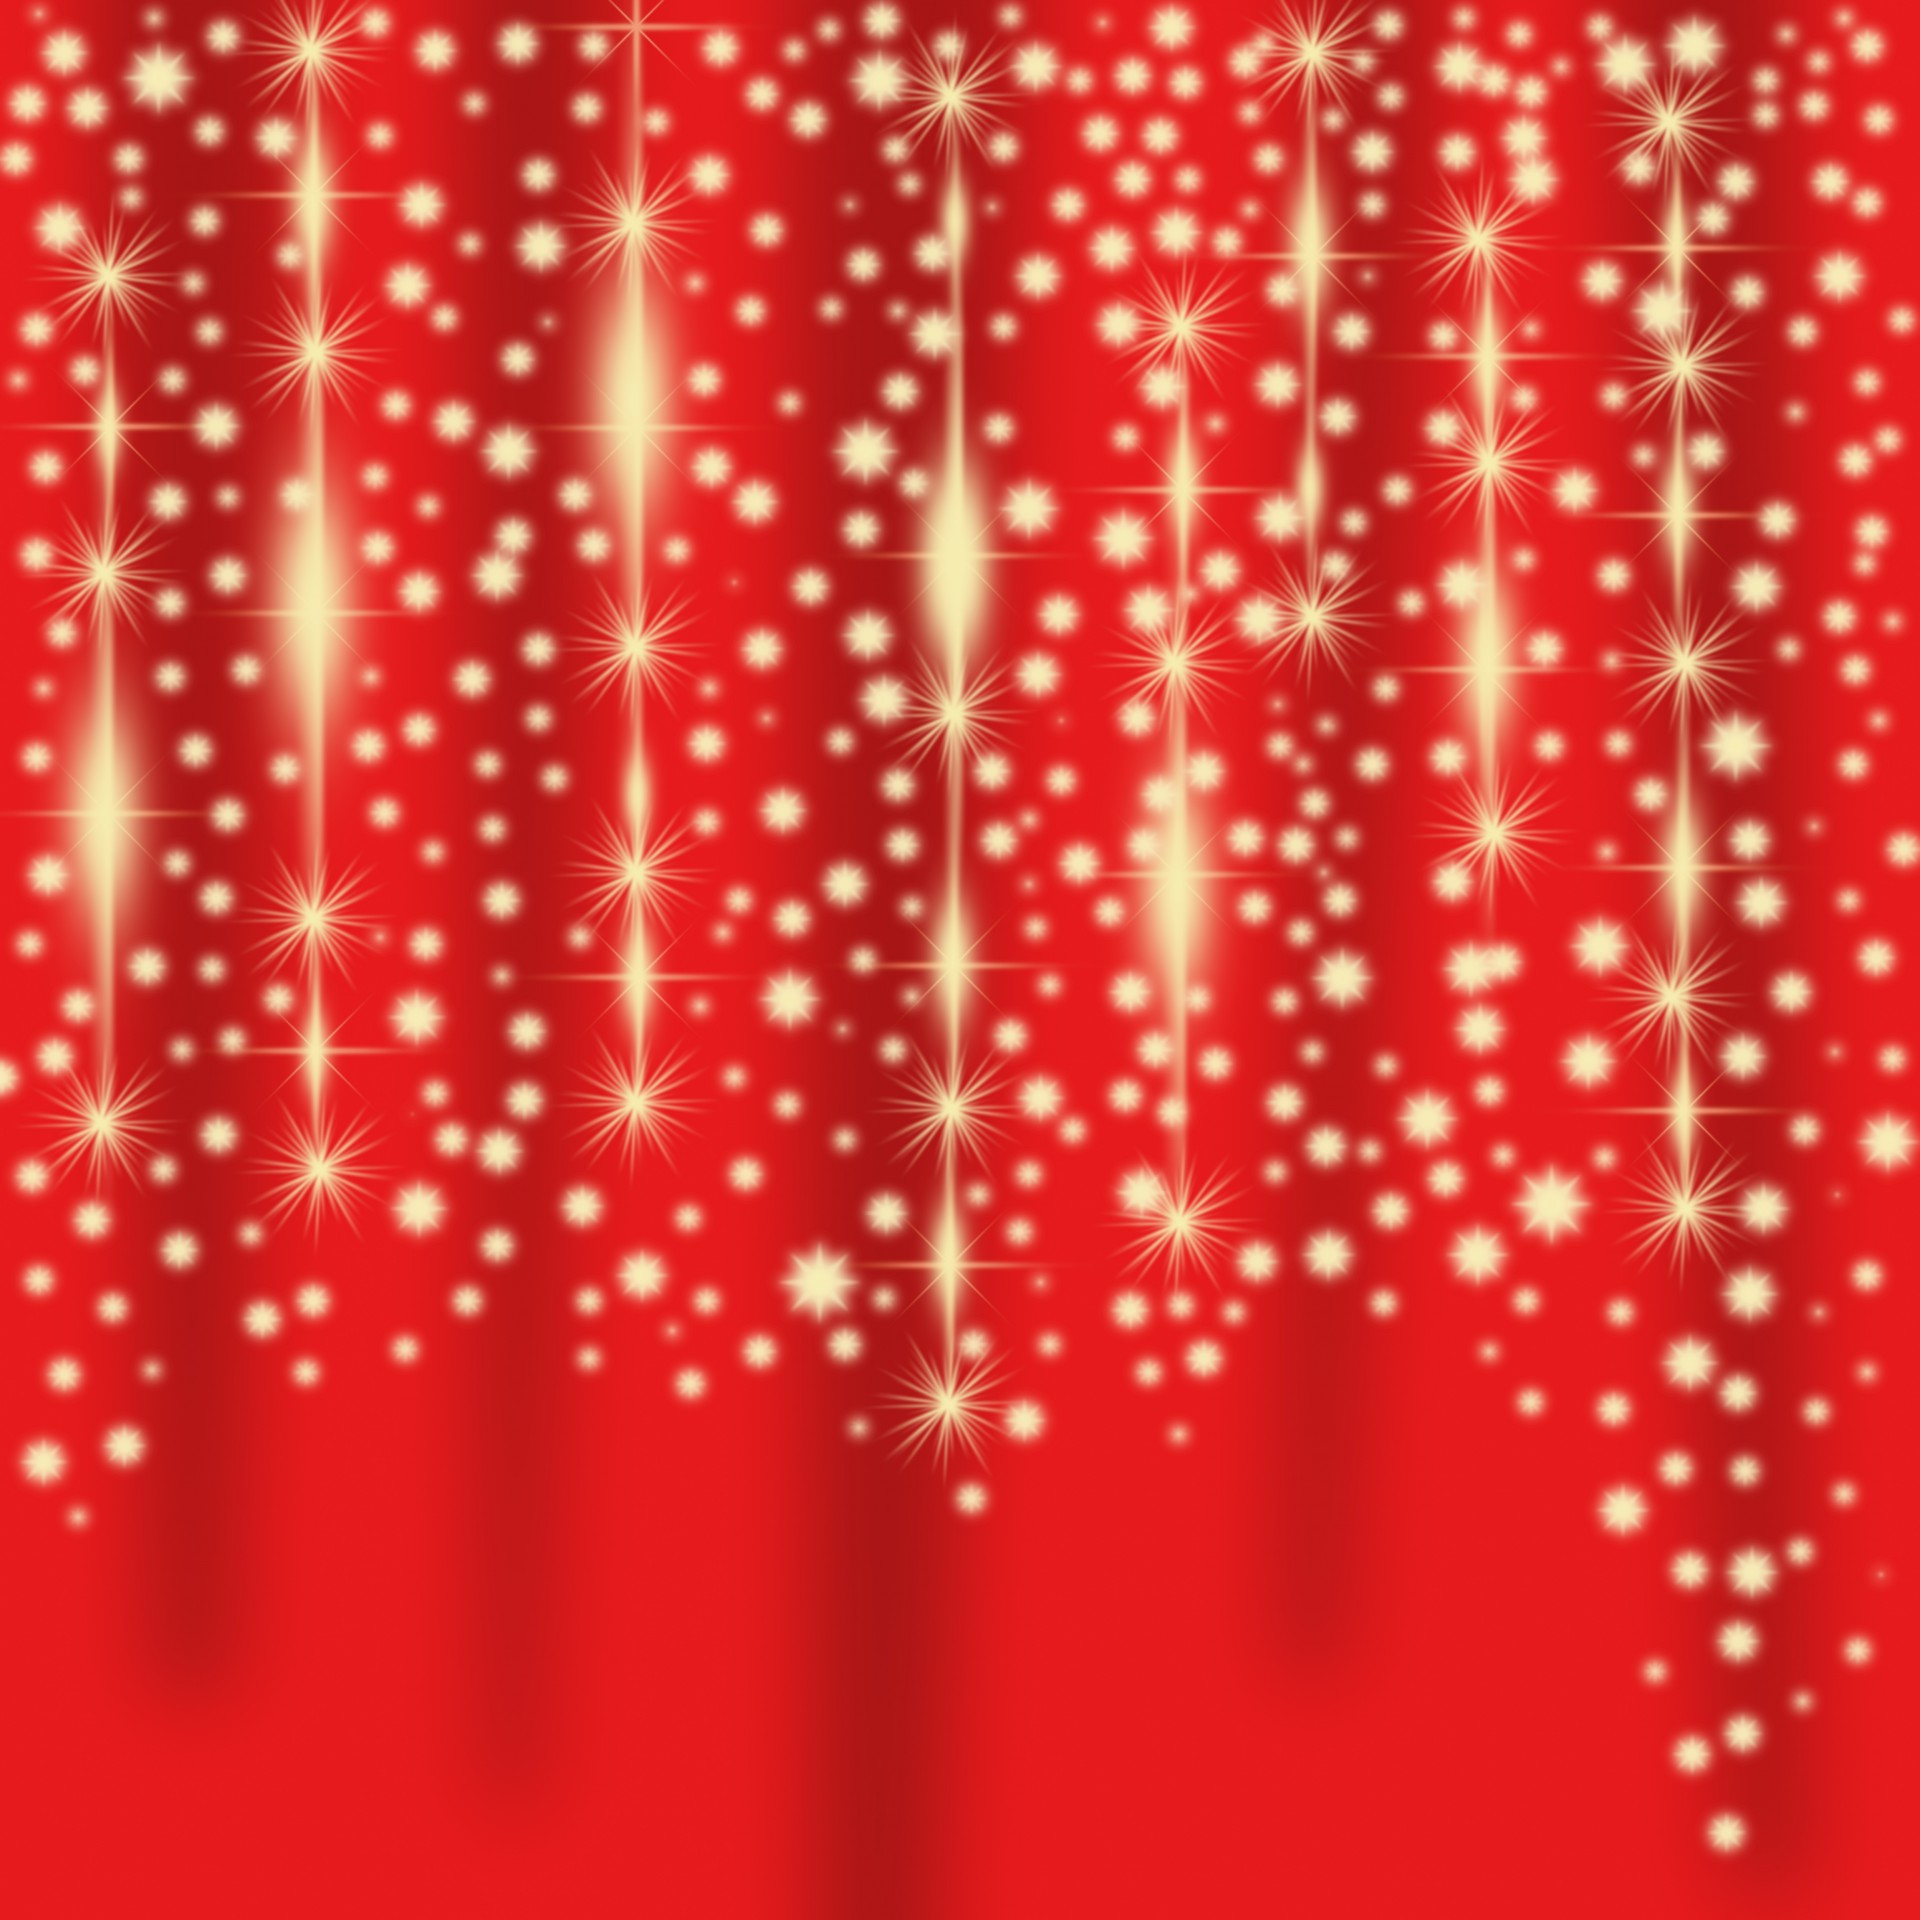 Red curtain background with lights dangling